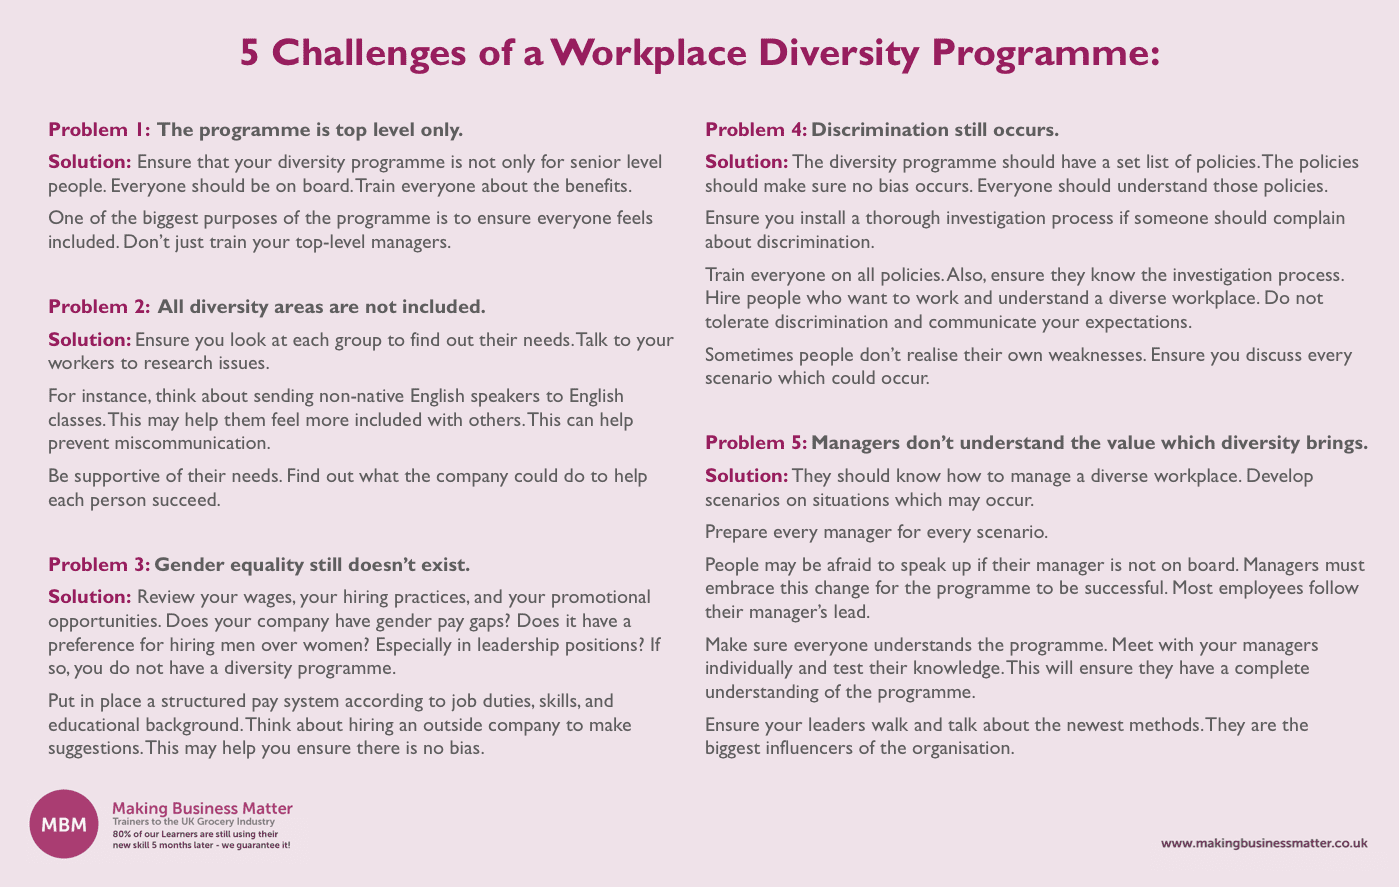 MBM poster titled 5 challenges of a workplace diversity programme lists five problems and solutions